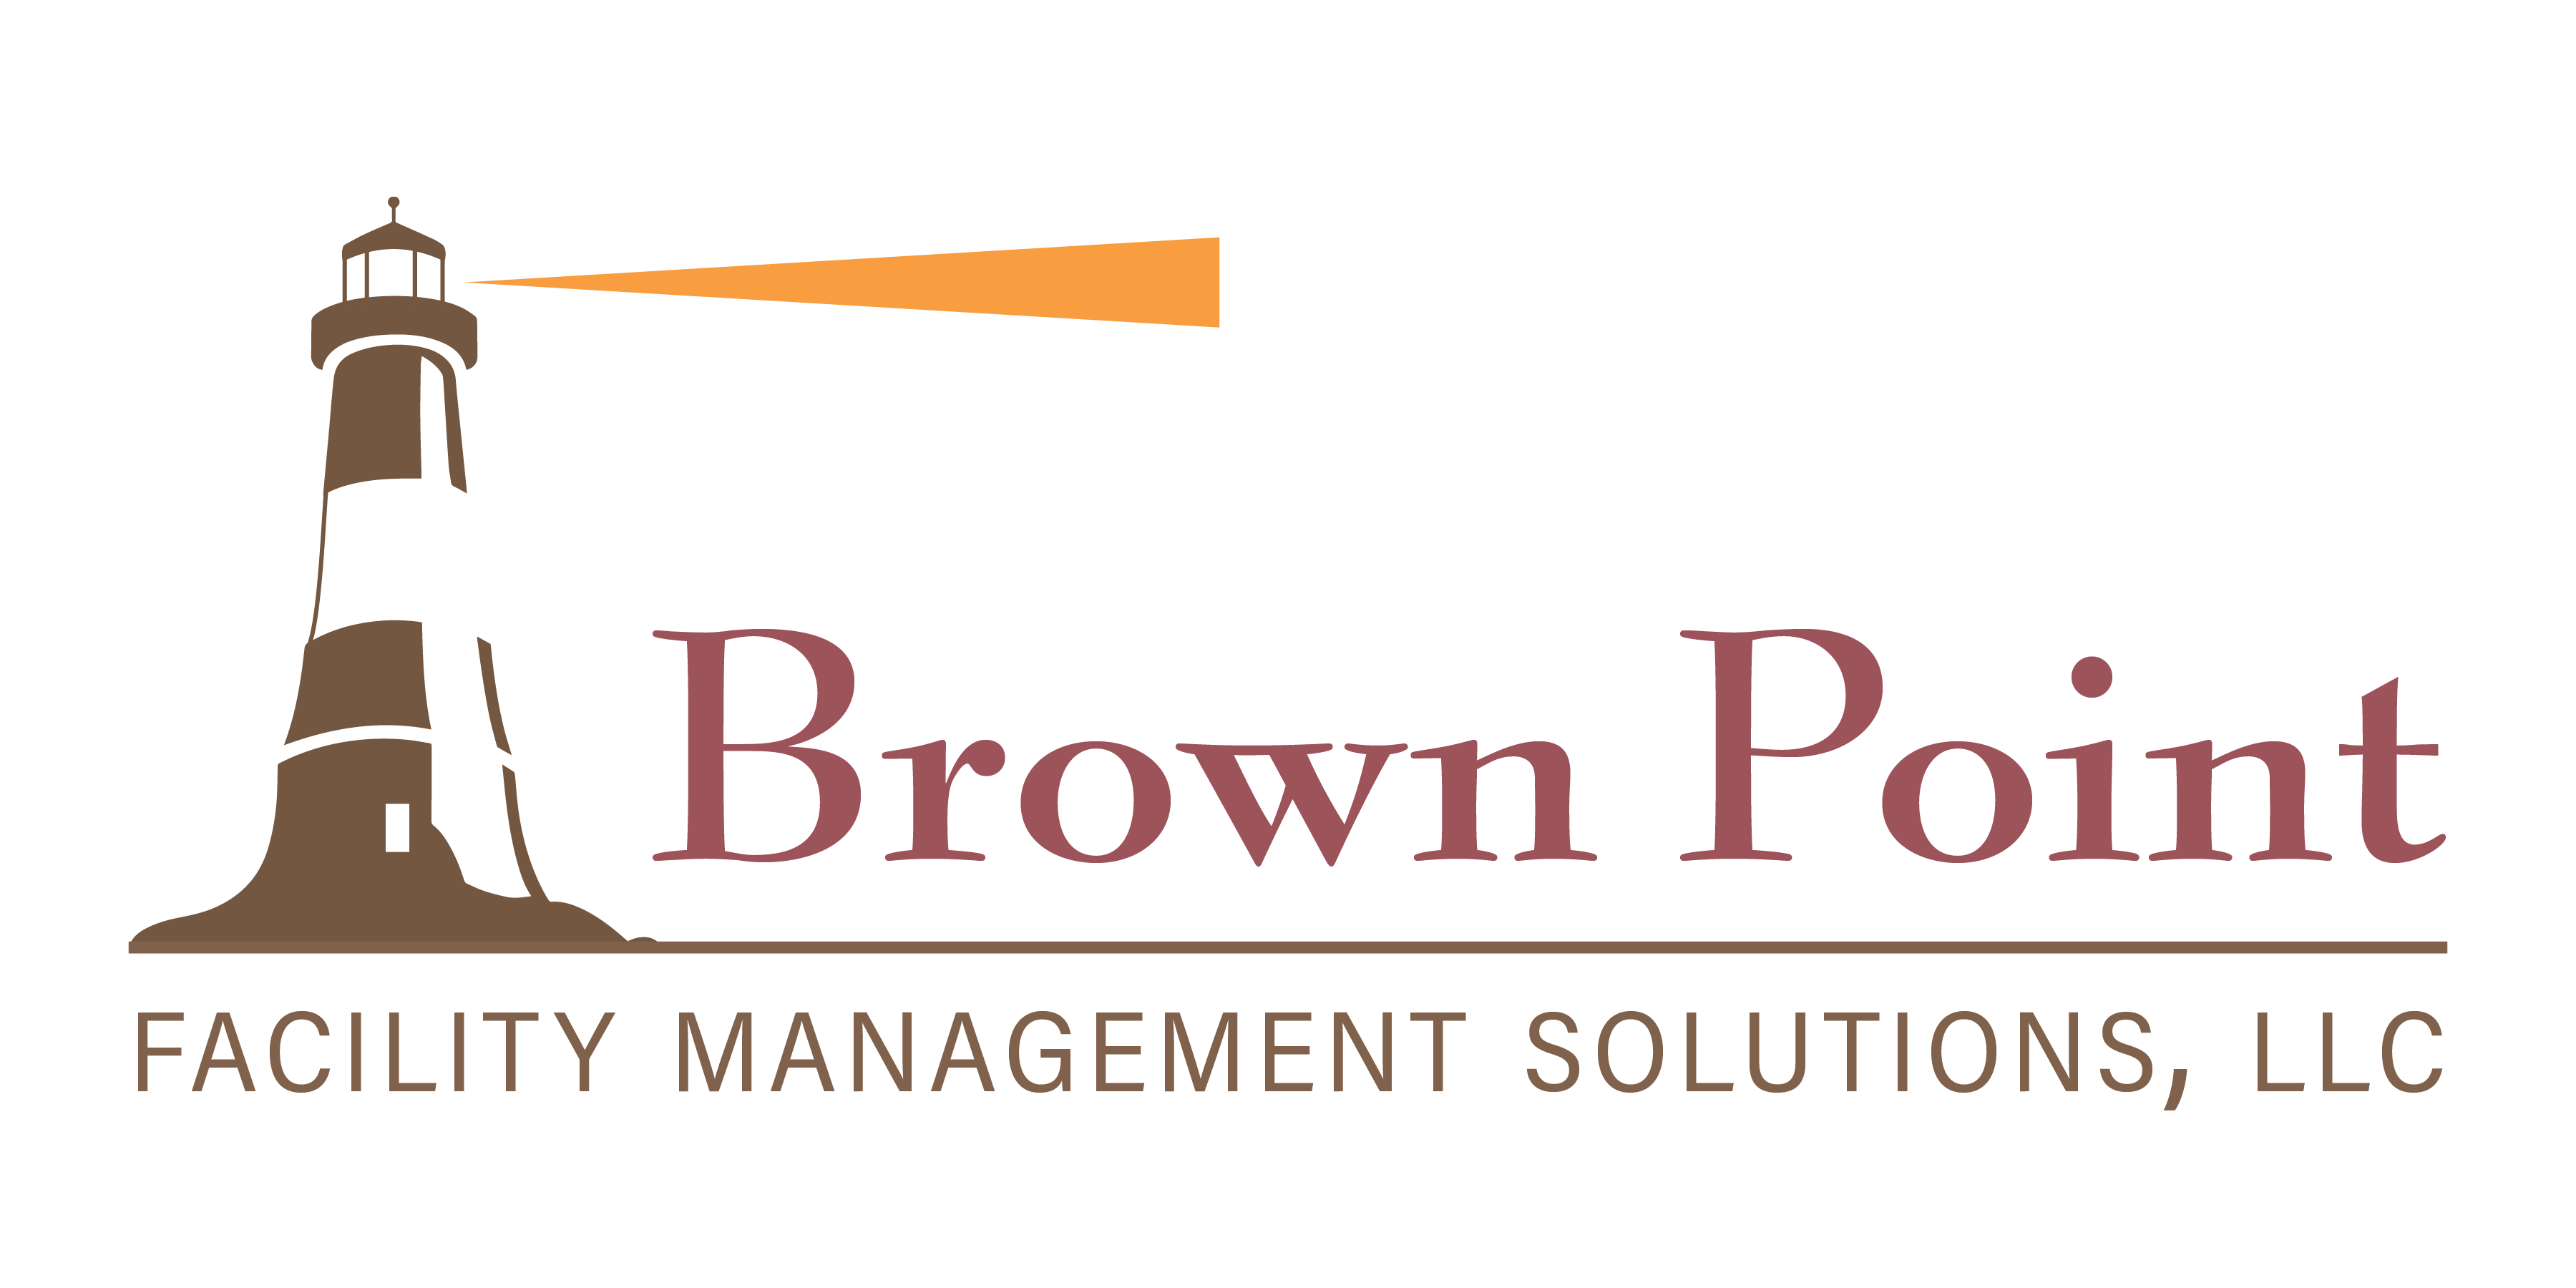 Brown Point Facility Management Solutions